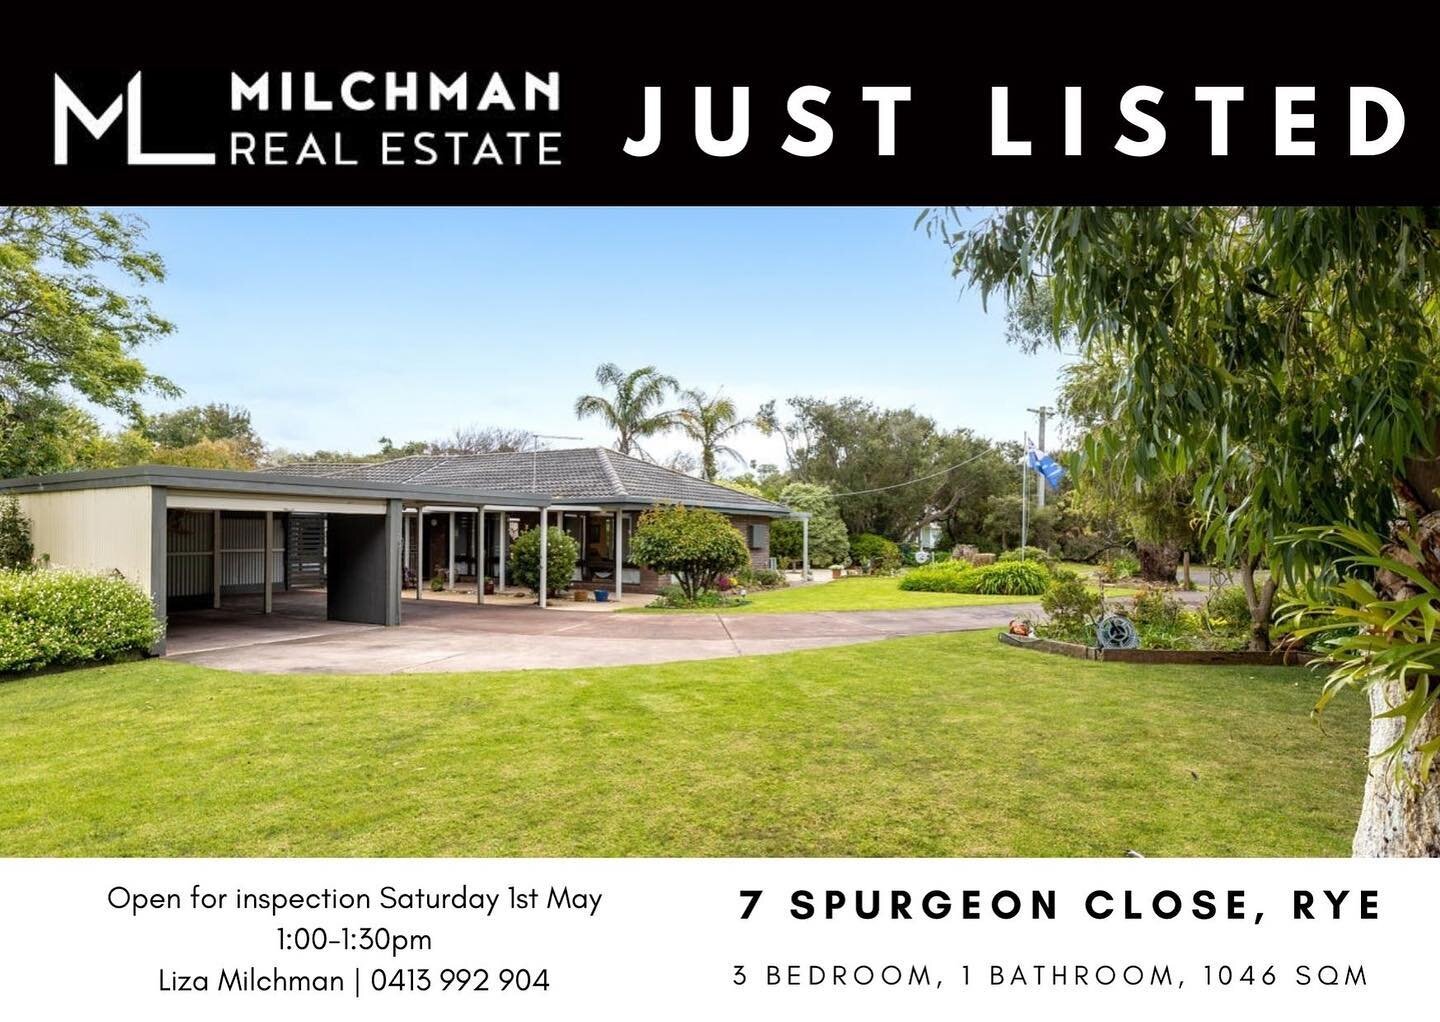 Another new listing that won&rsquo;t last long. Located in one of Rye&rsquo;s most sought after pockets, this property has been loved and kept in an immaculate condition. Quiet court location. 
&bull;
&bull;
&bull;

#milchmanrealestate #lizamilchman 